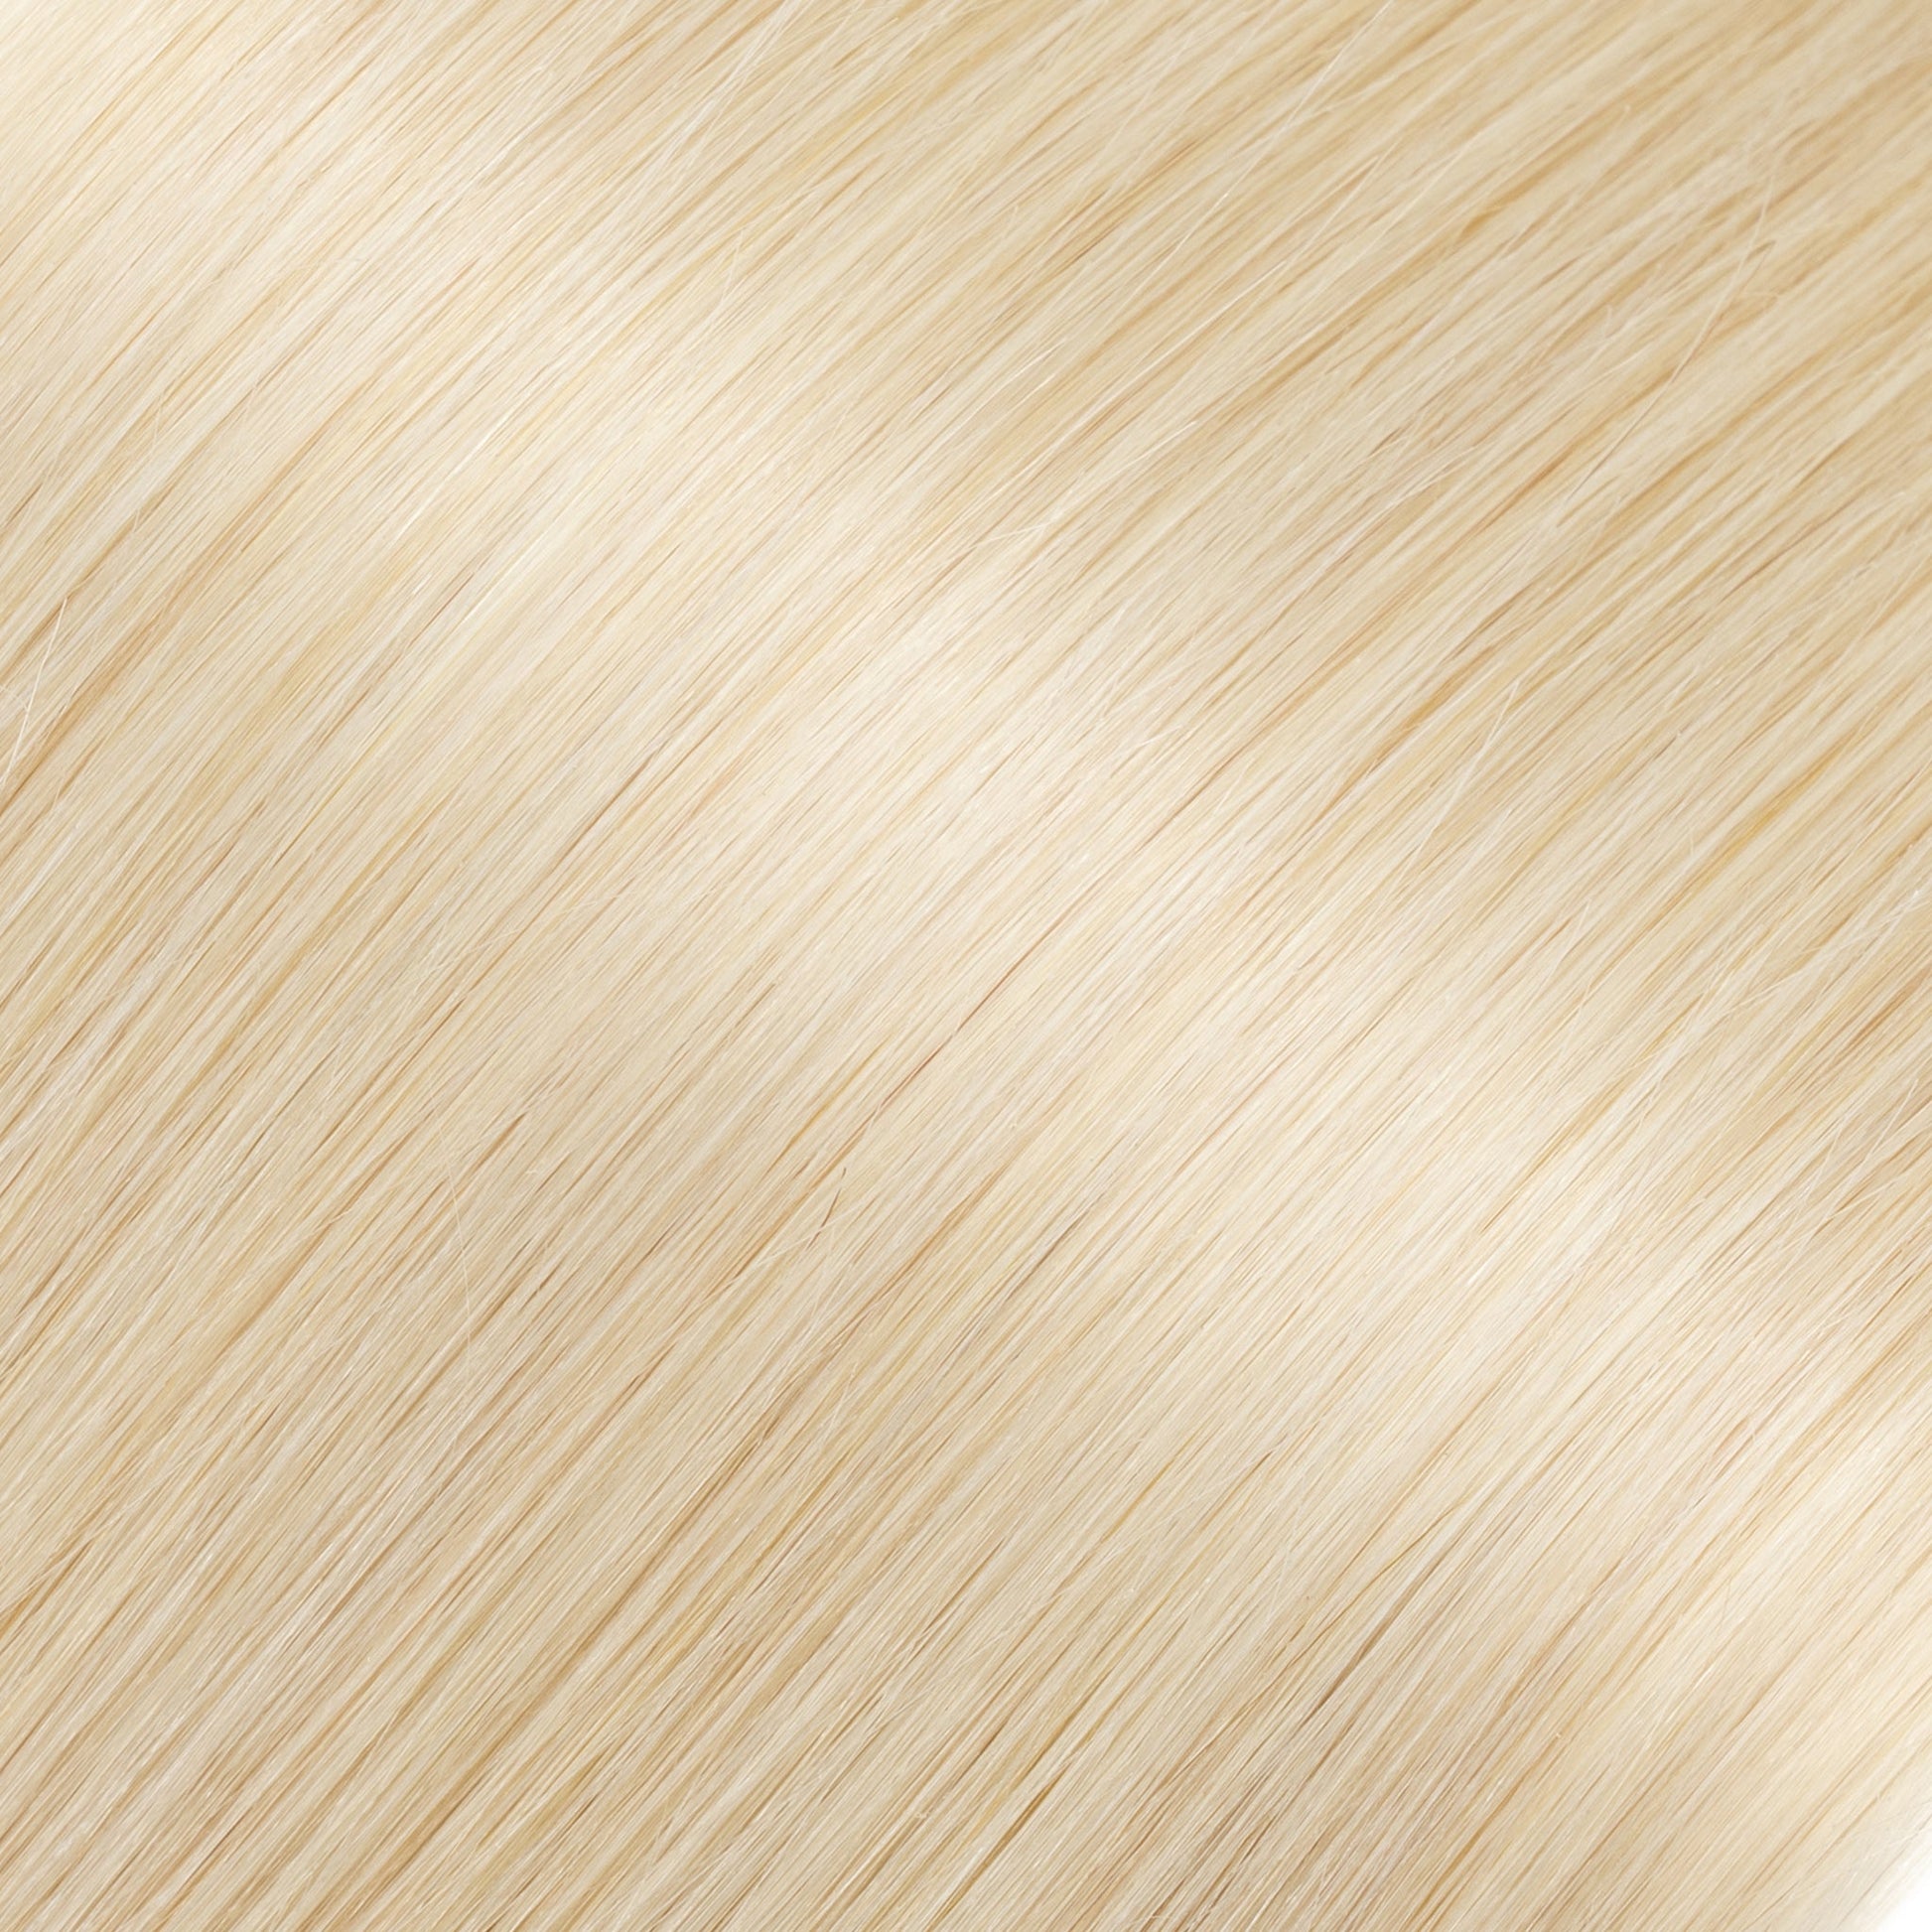 Platinum Blonde Tape in Hair Extensions Invisible Weft 10 PCS segohair.com